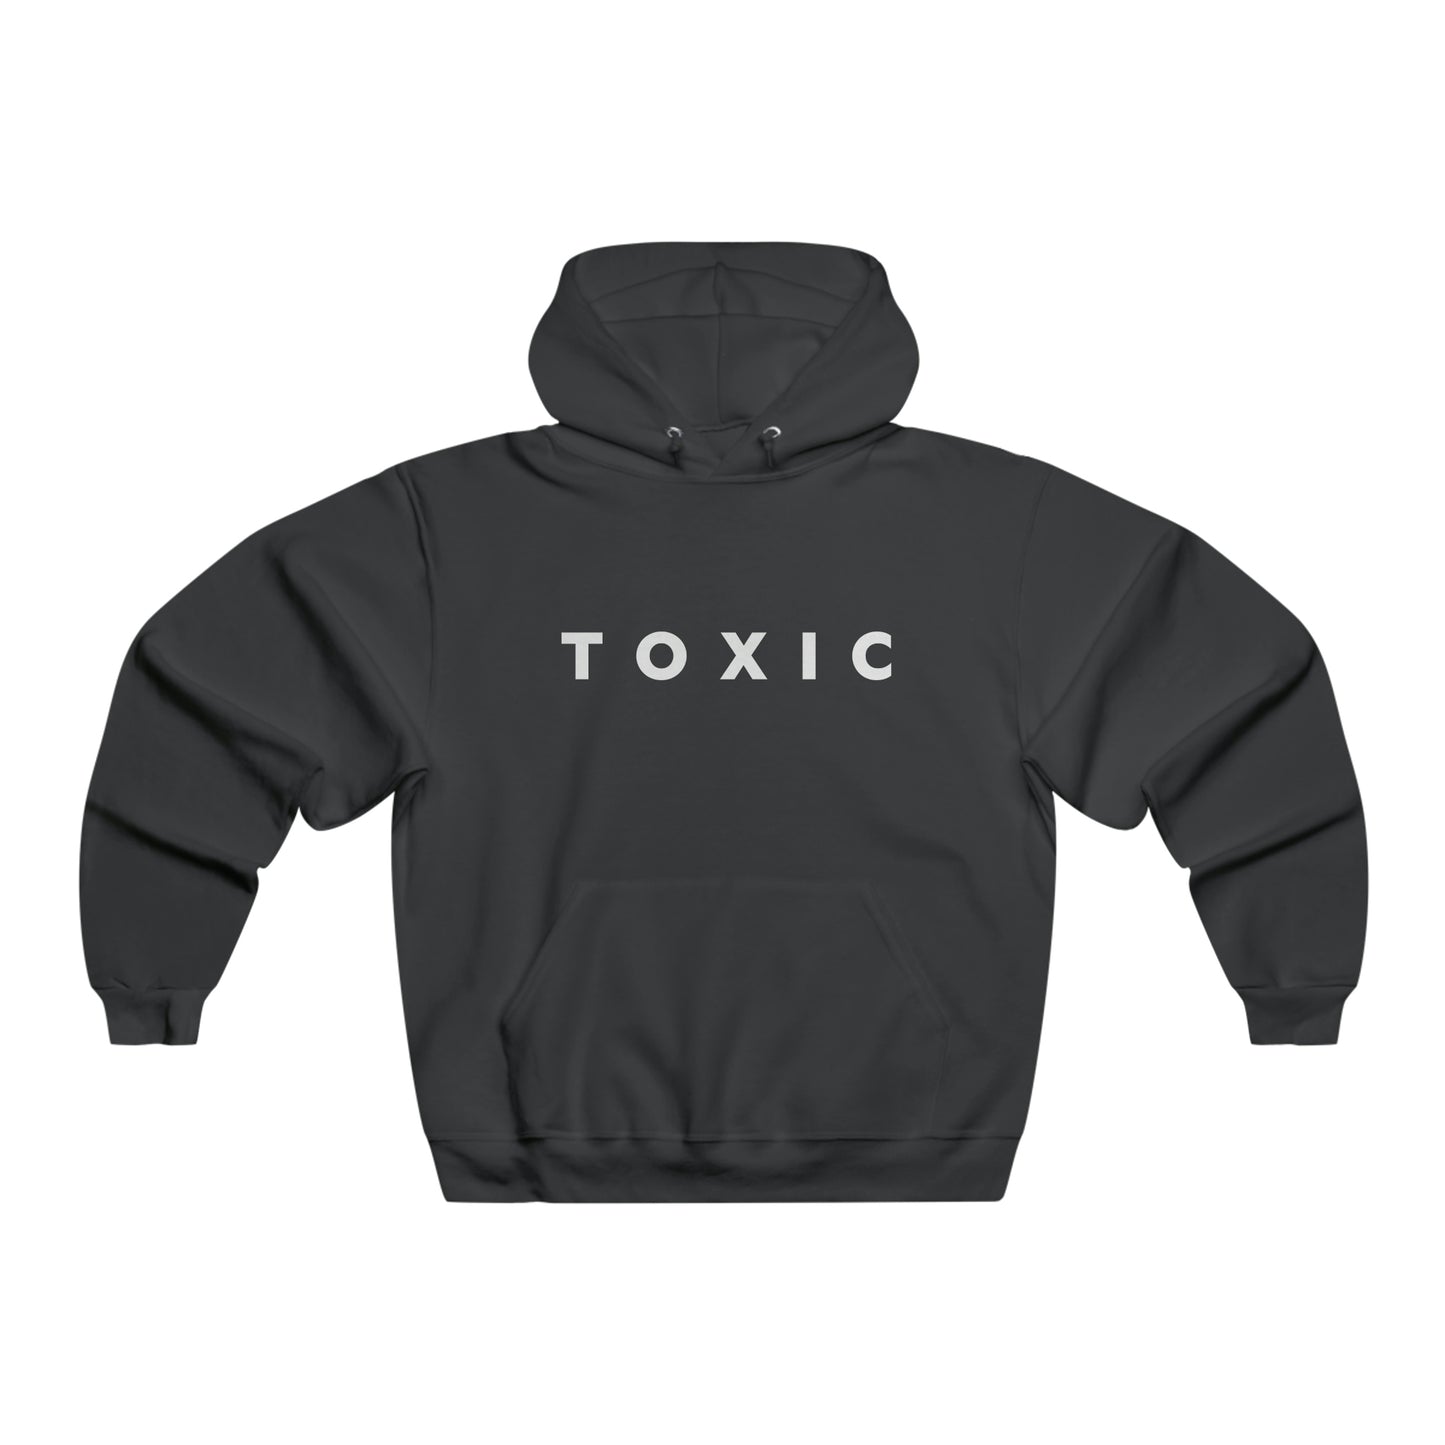 Toxic Graphic Hoodie - Edgy Streetwear for Men and Women | Nile Streetwear"